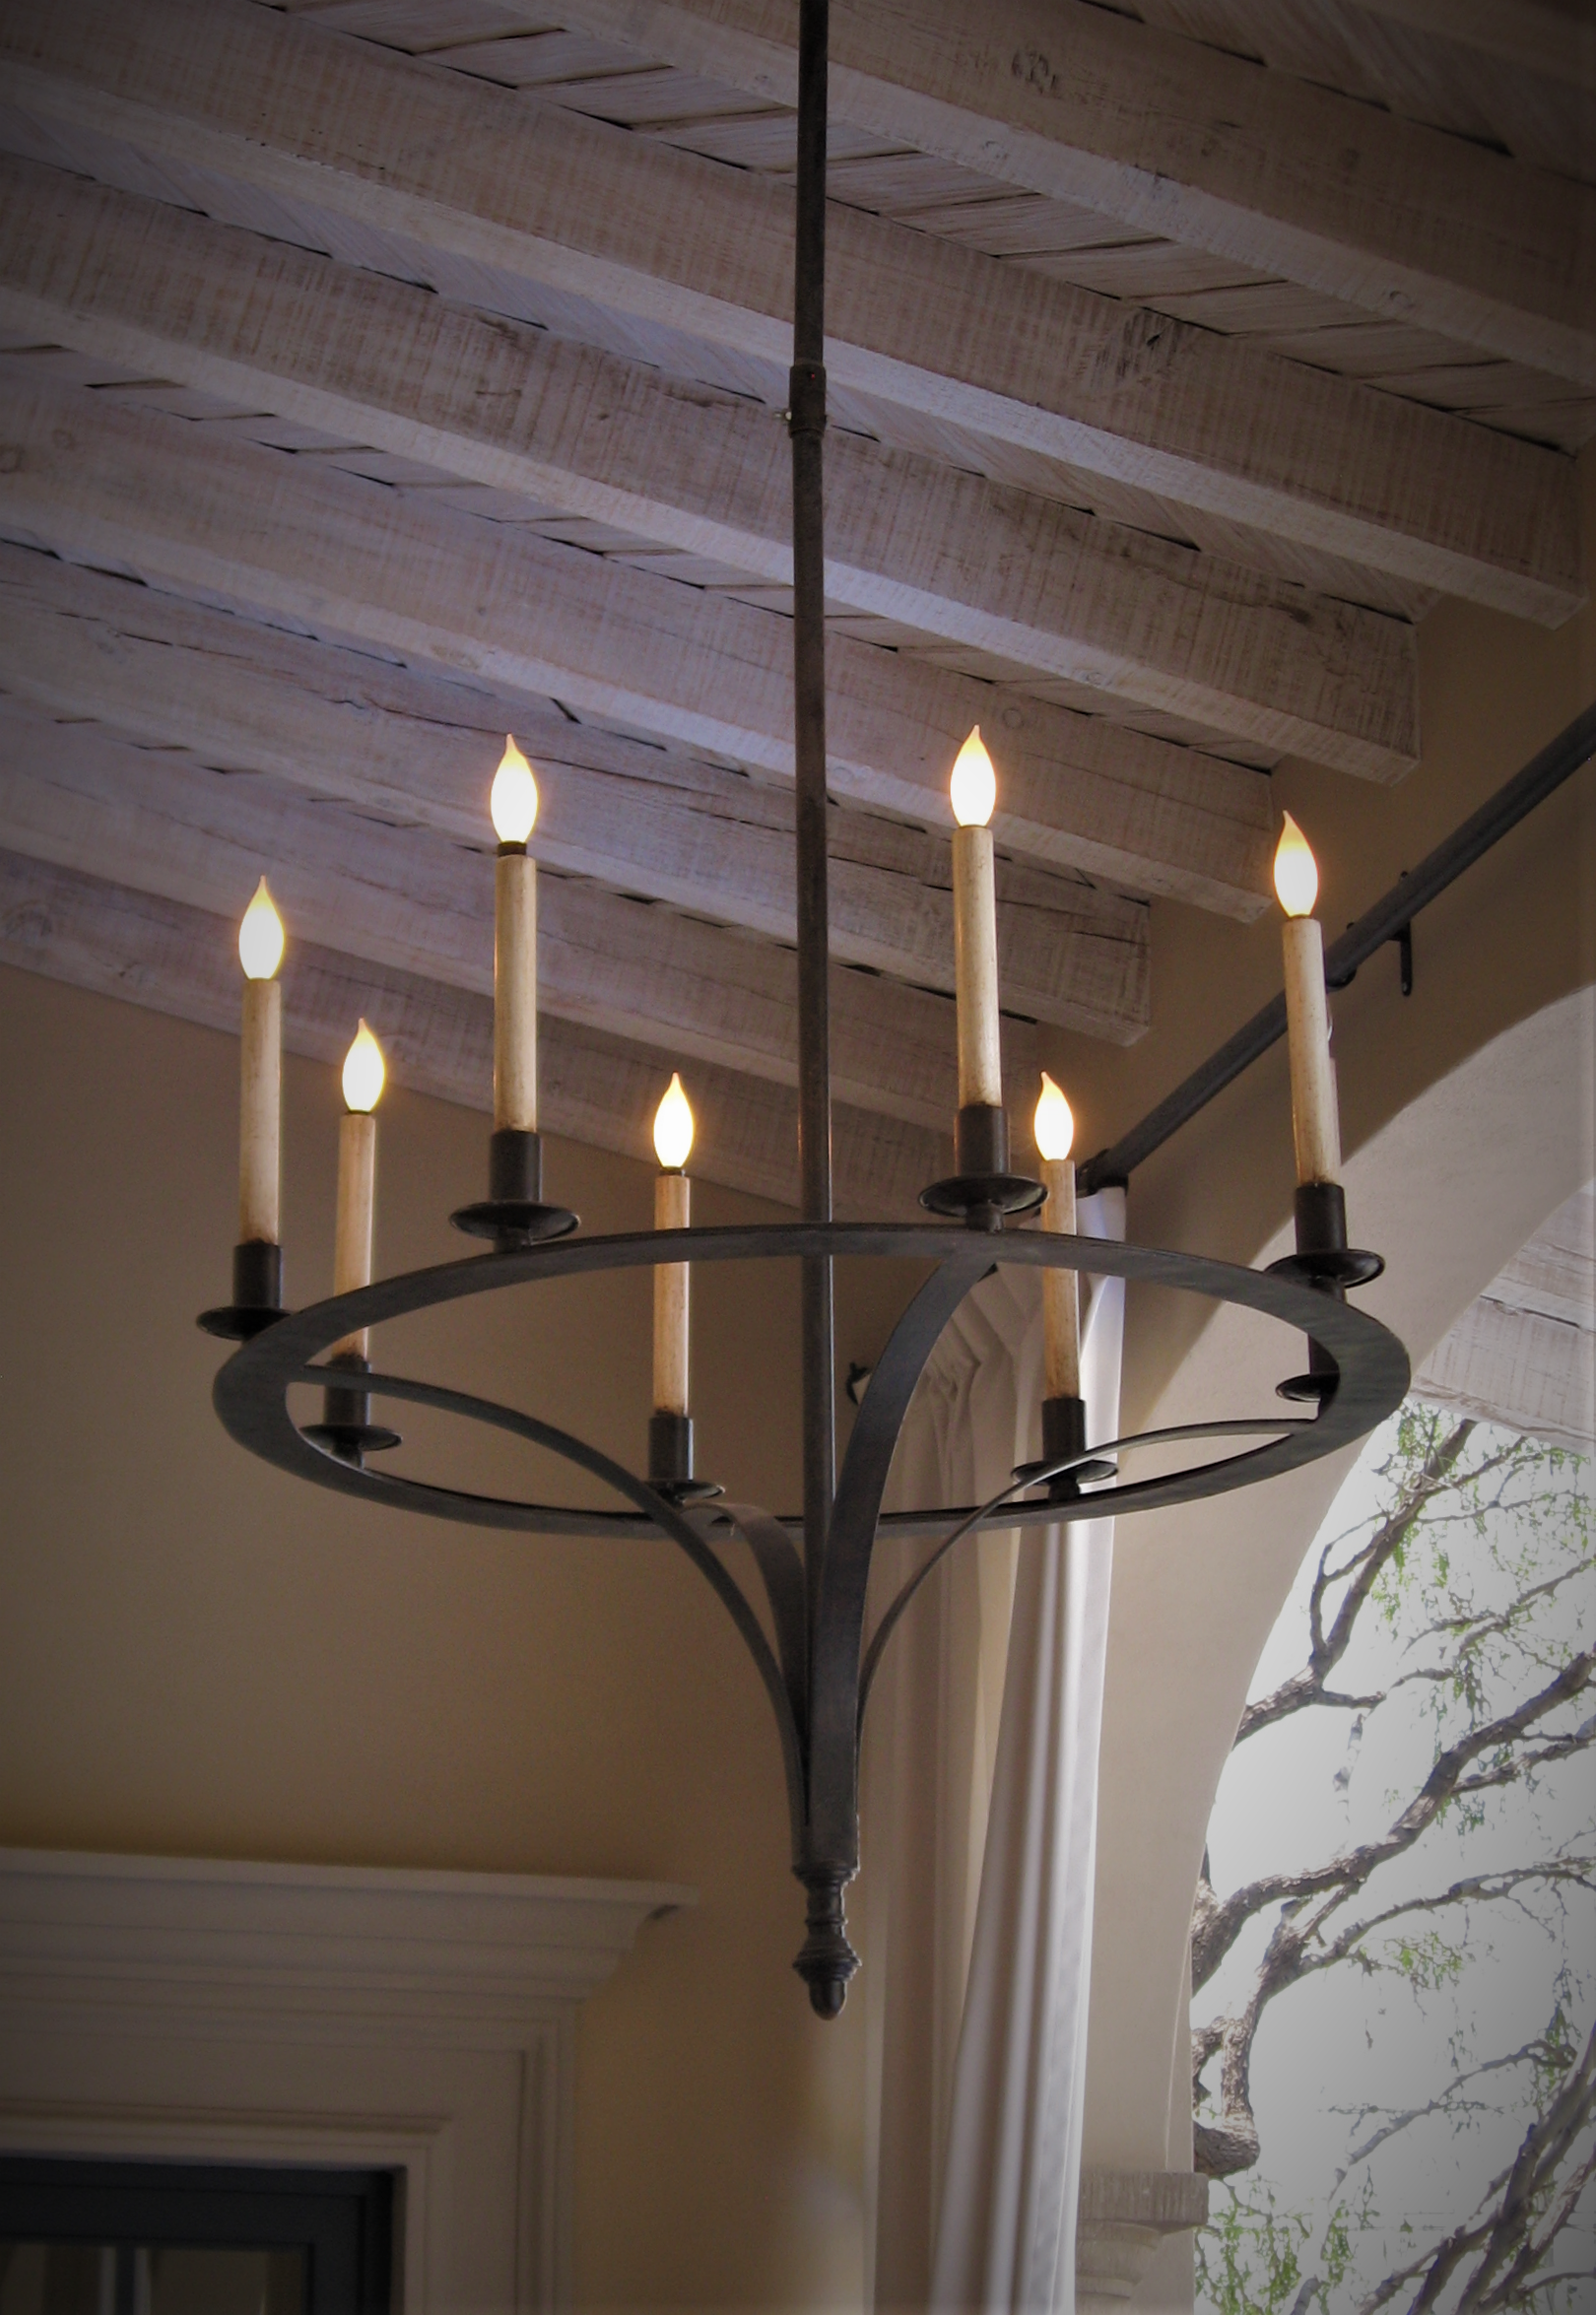 Elegant Iron Chandeliers That Add Drama
to Any Room